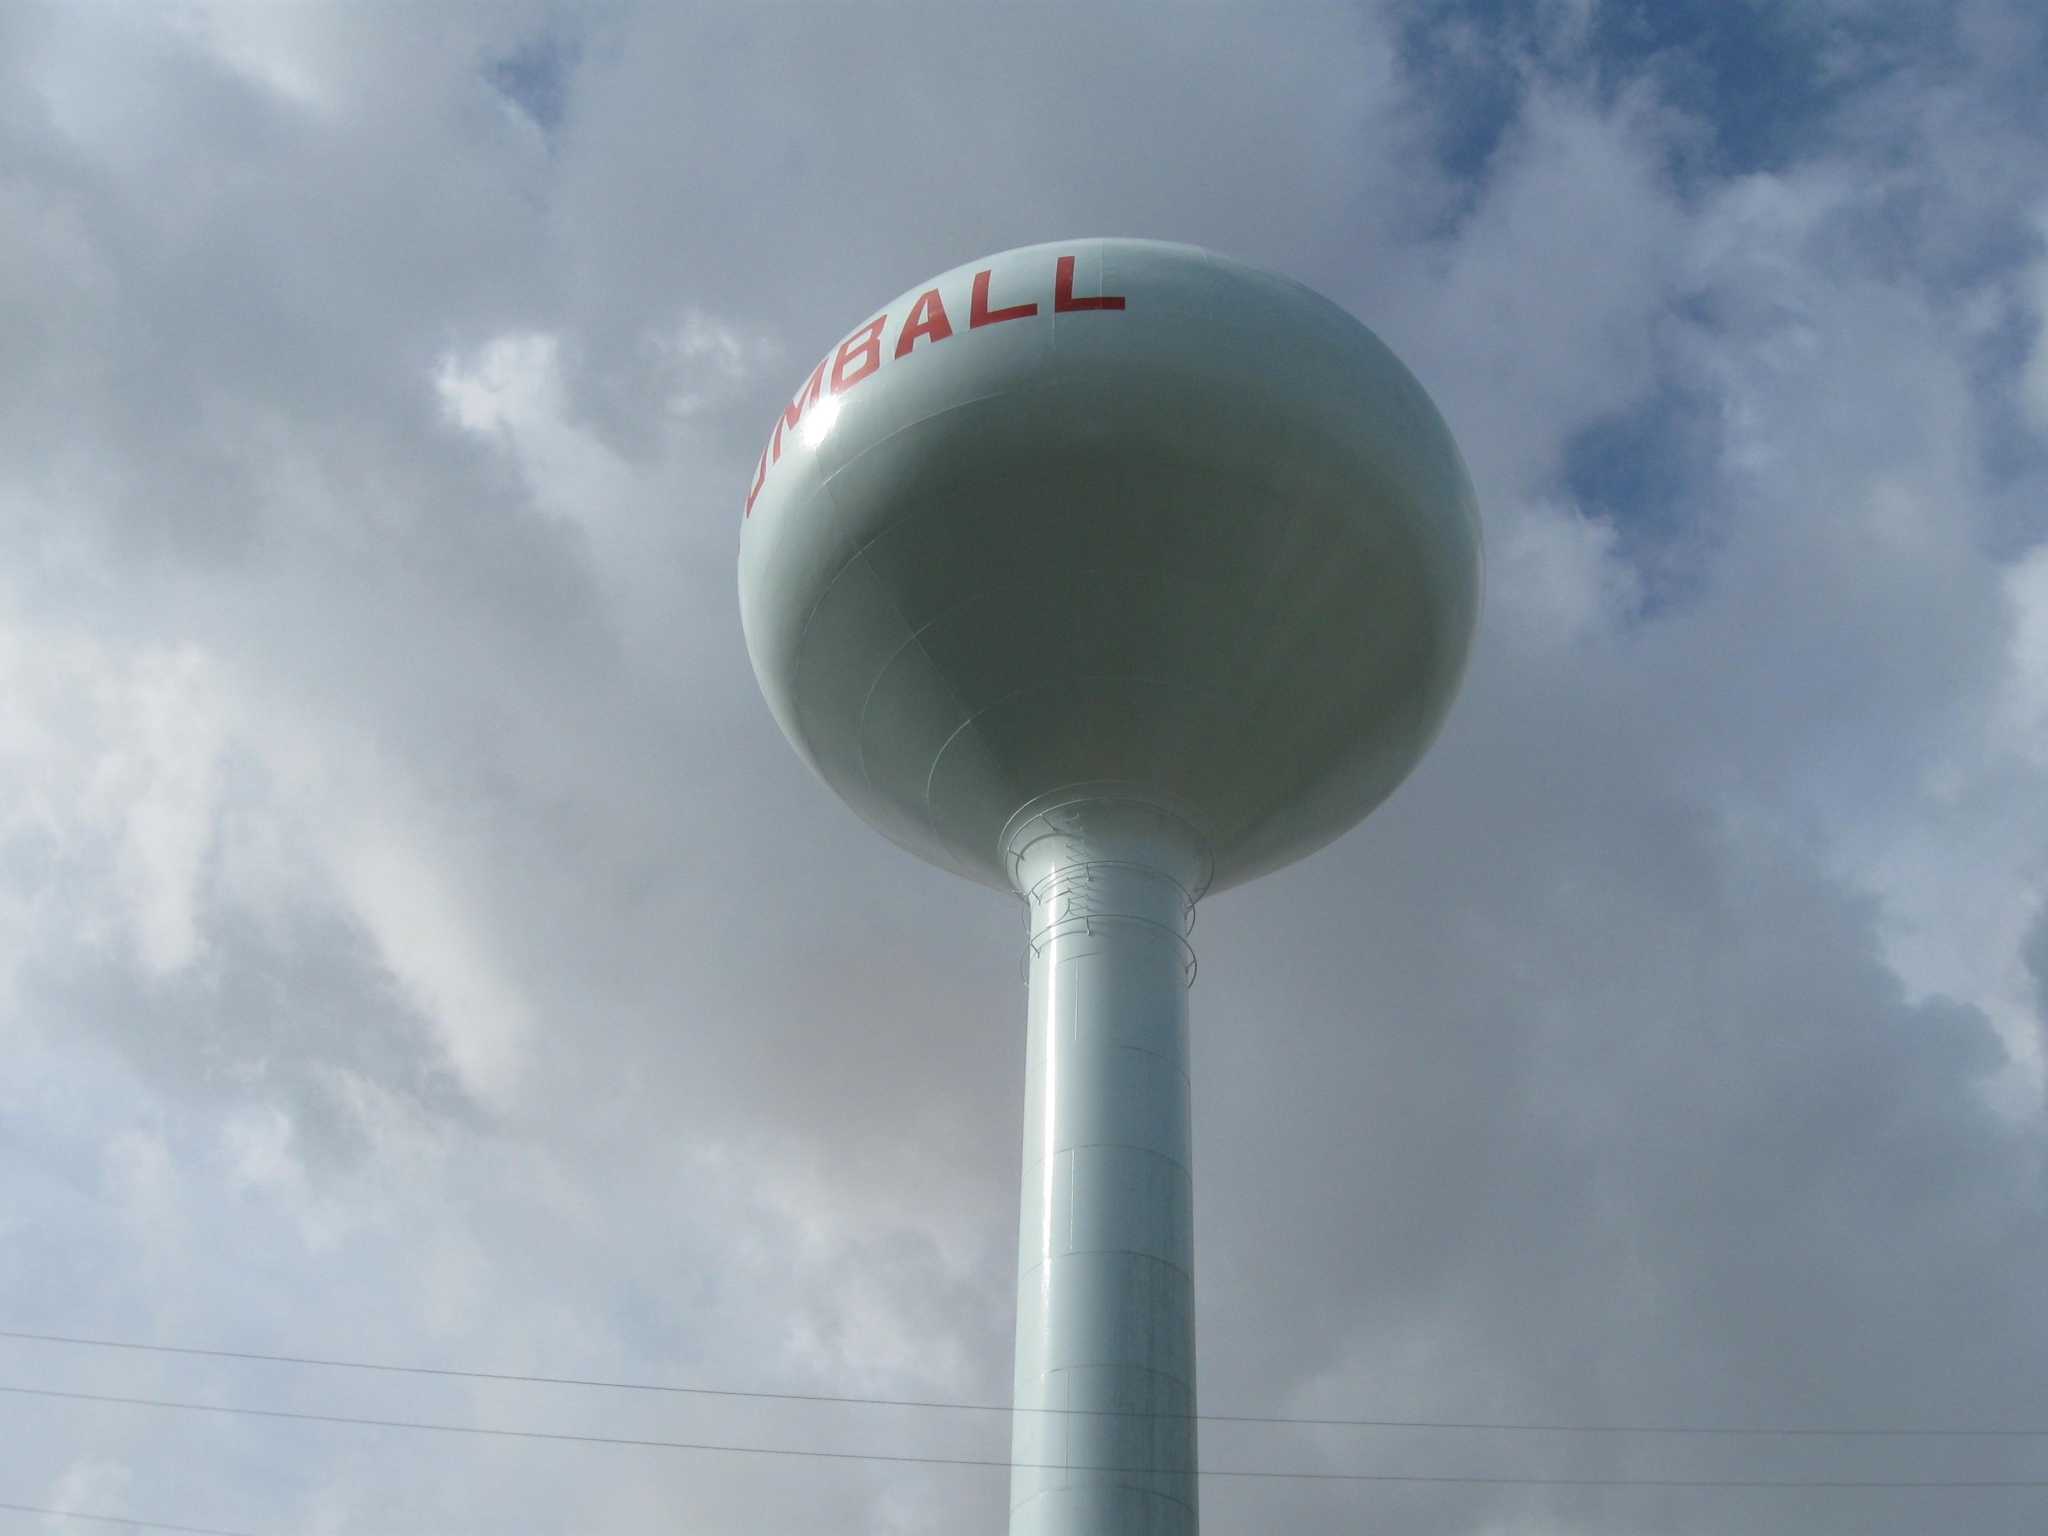 Tomball city council ponders future water projects